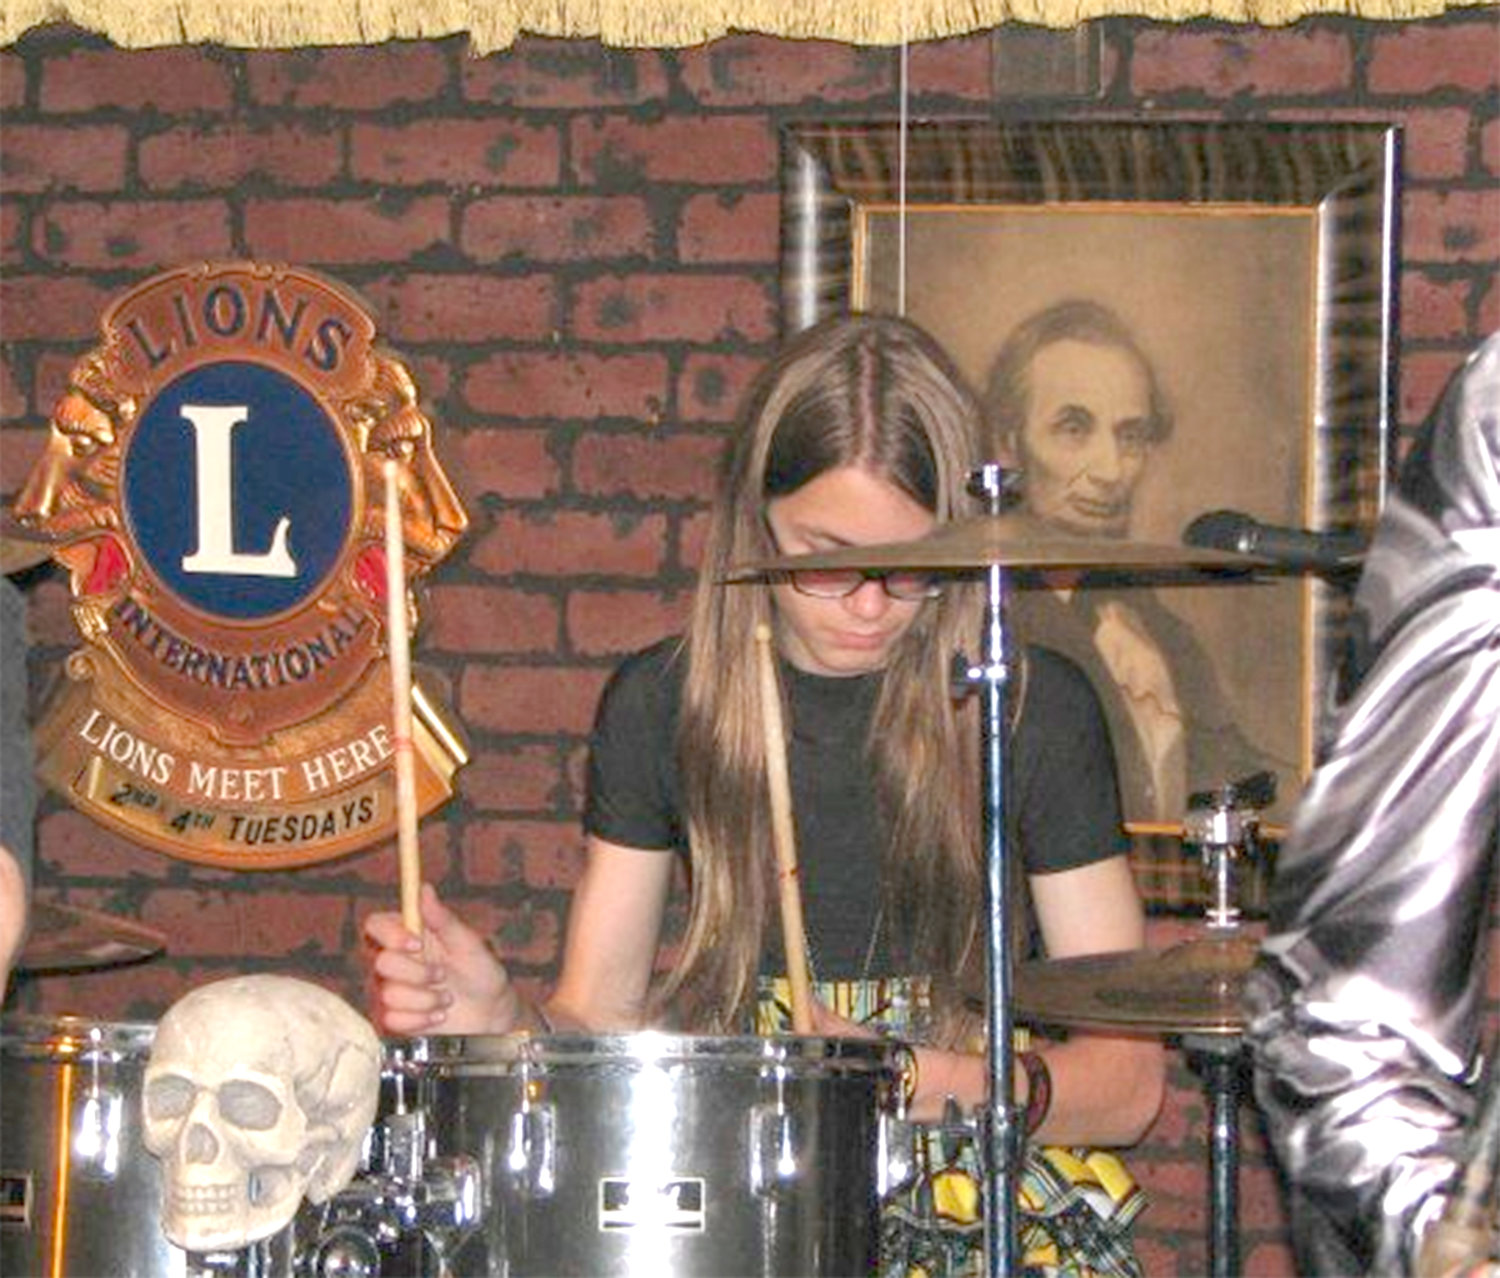 Gunnar Coston plays drums during a 2013 concert at the former Madison House Restaurant in Oneida, flanked by a photo of President Abraham Lincoln.